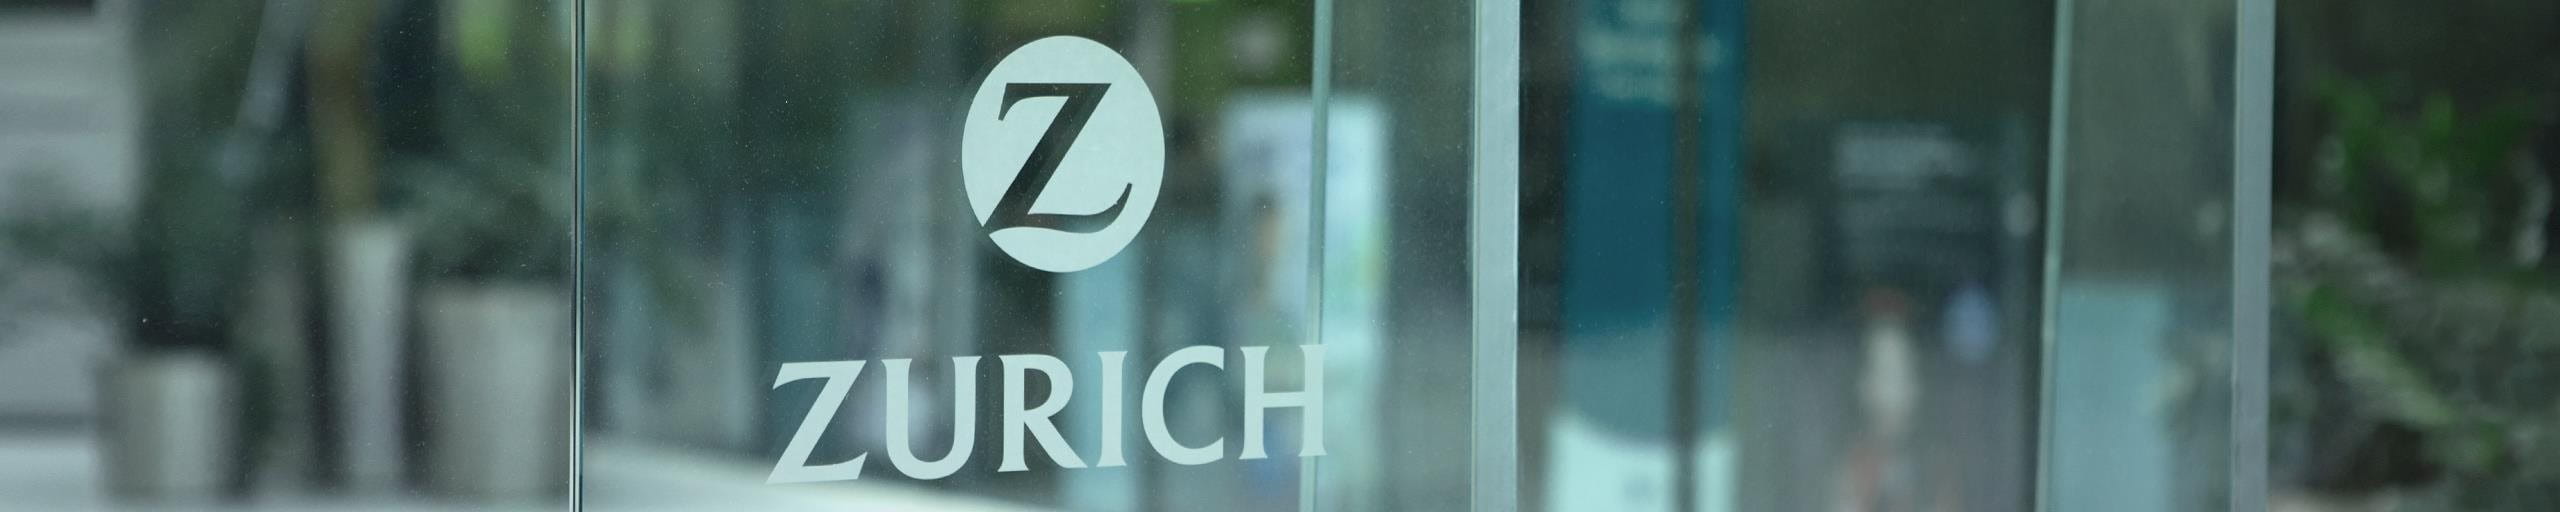 The Zurich logo attached to a window.